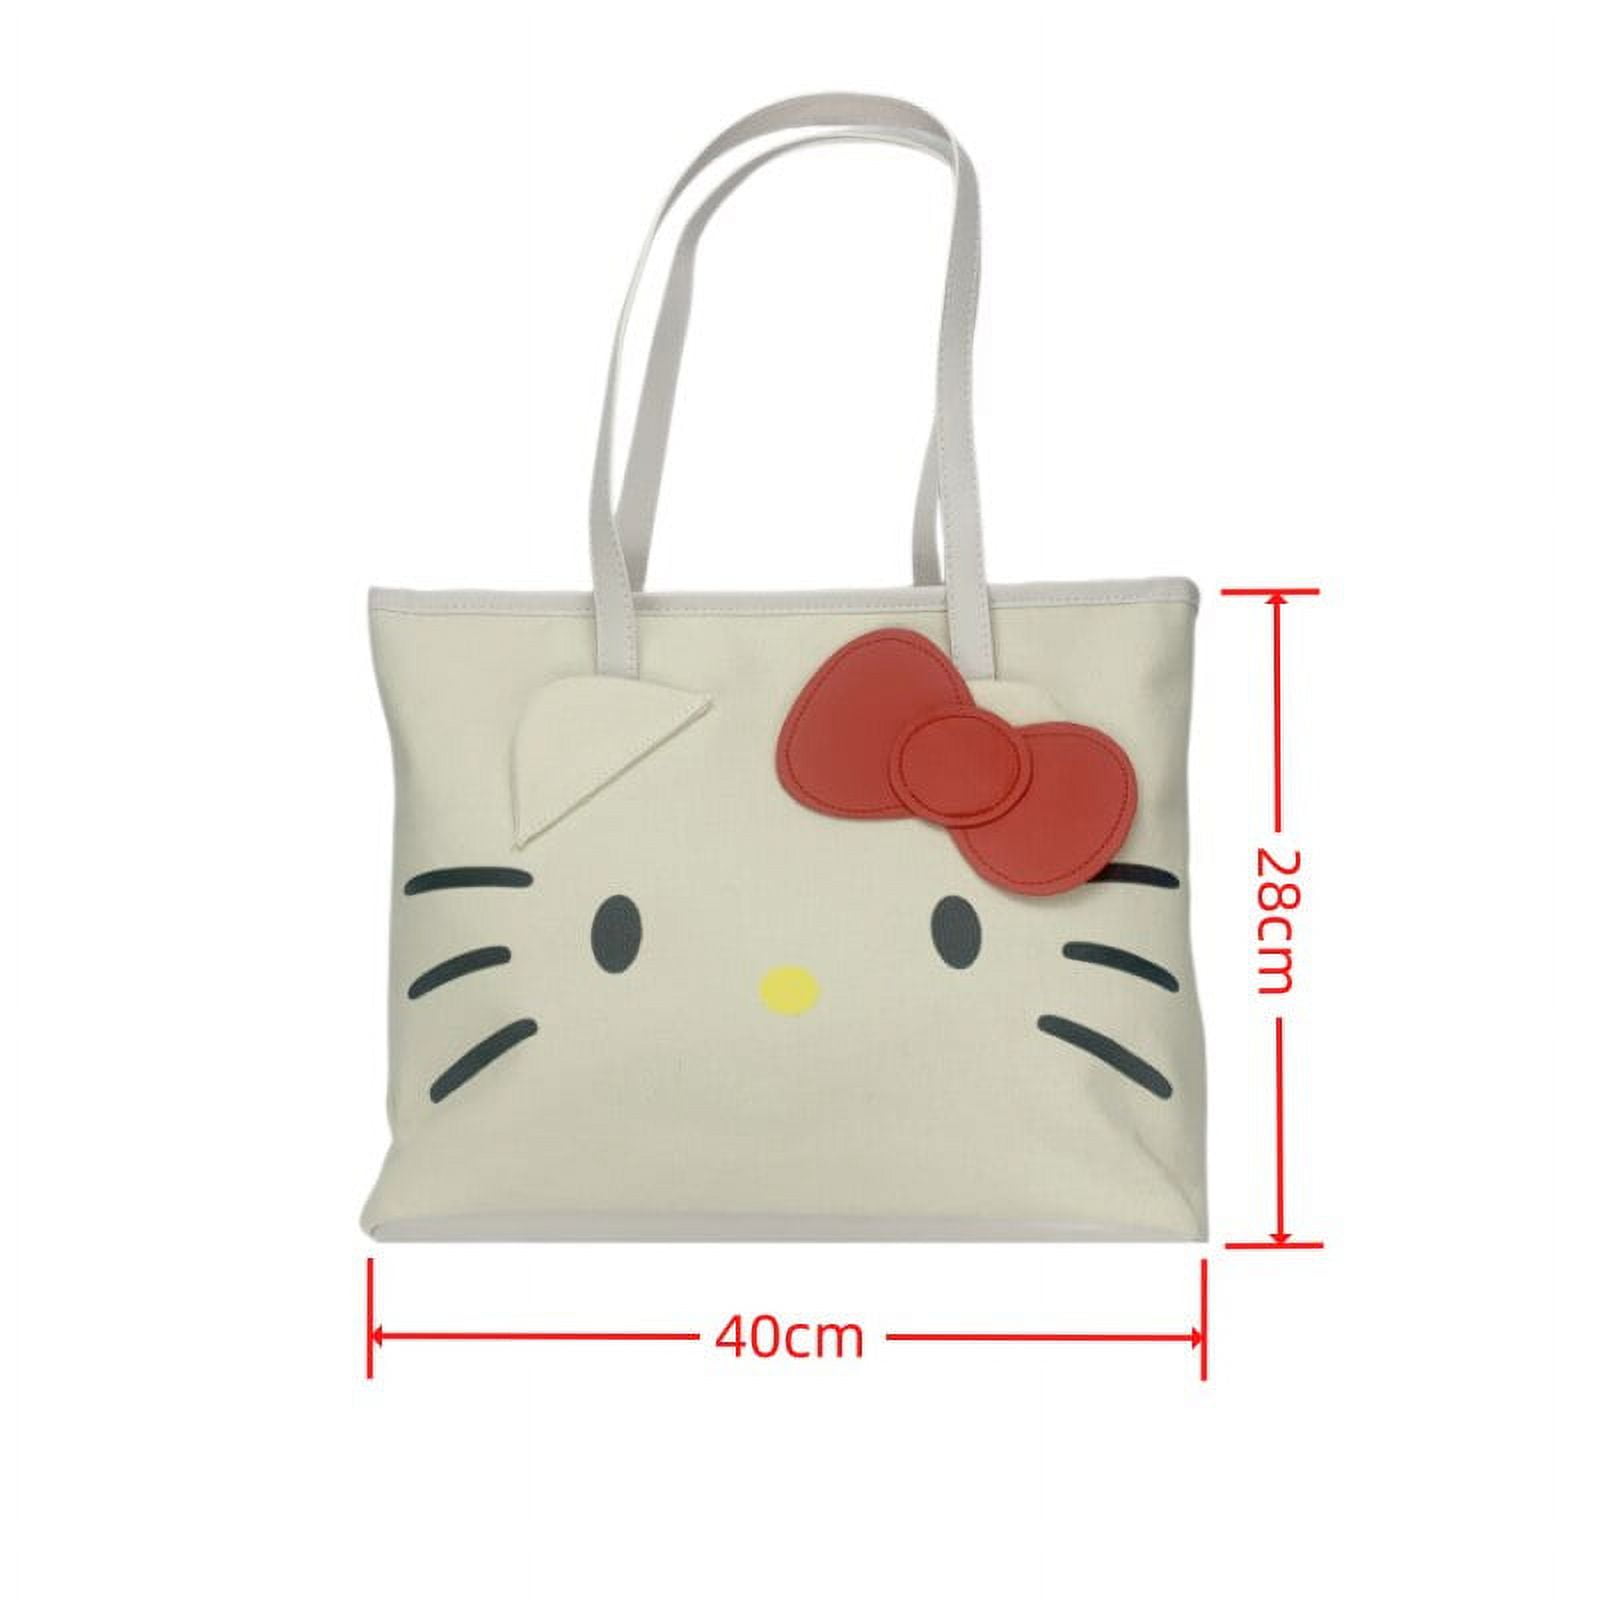 Hello Kitty Canvas Shoulder Bags